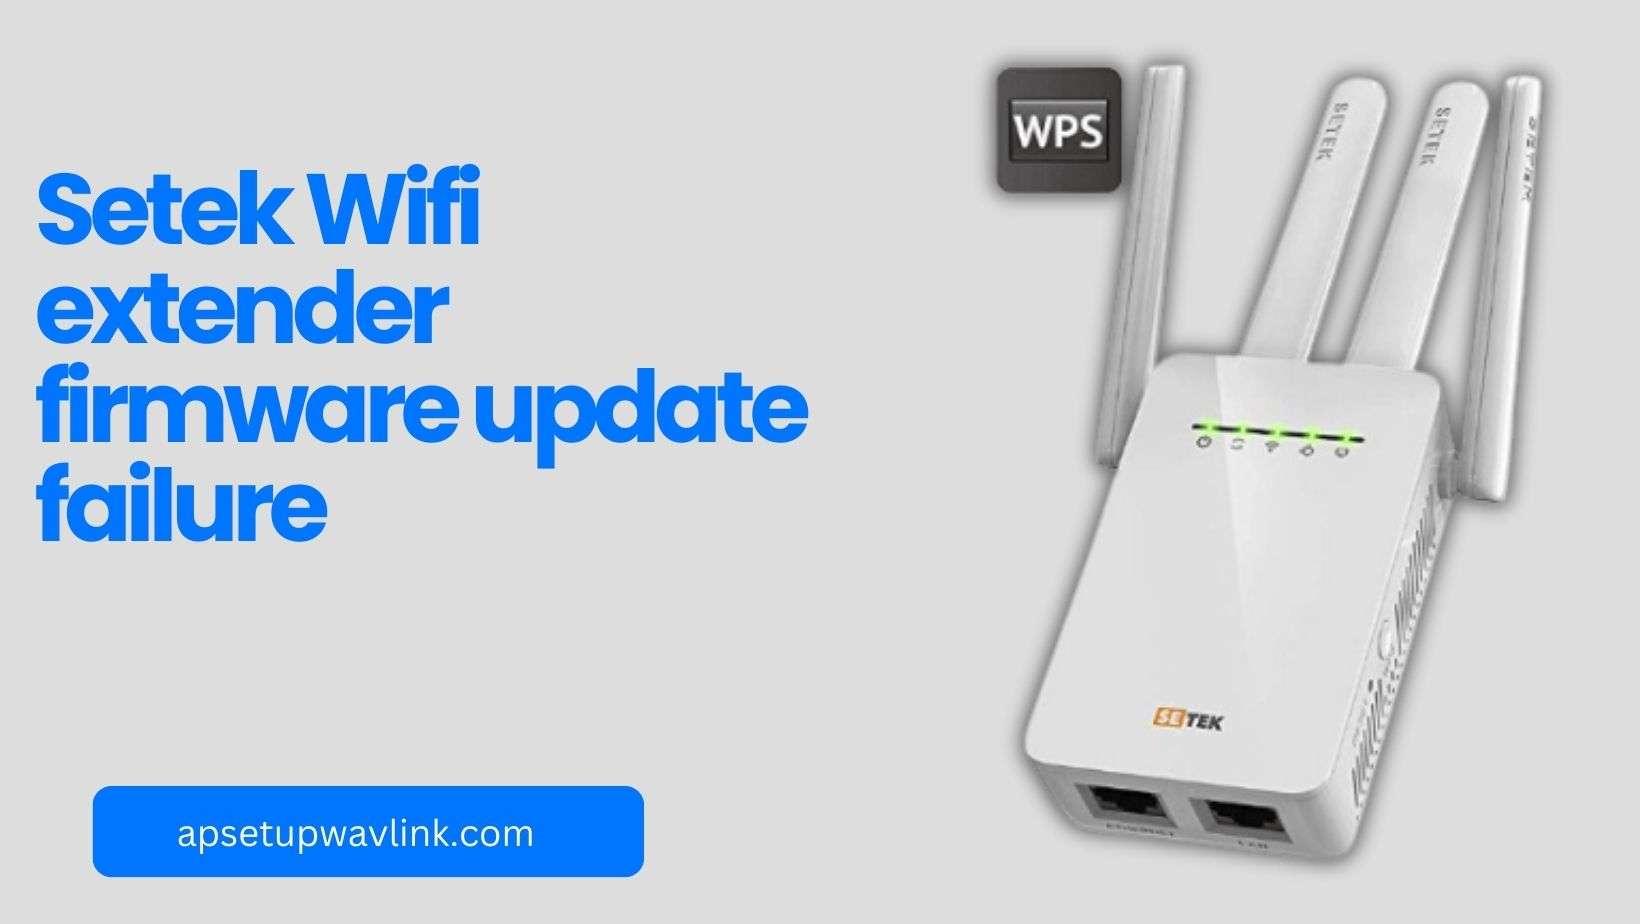 You are currently viewing Troubleshoot Guide Setek Wifi extender firmware update failure